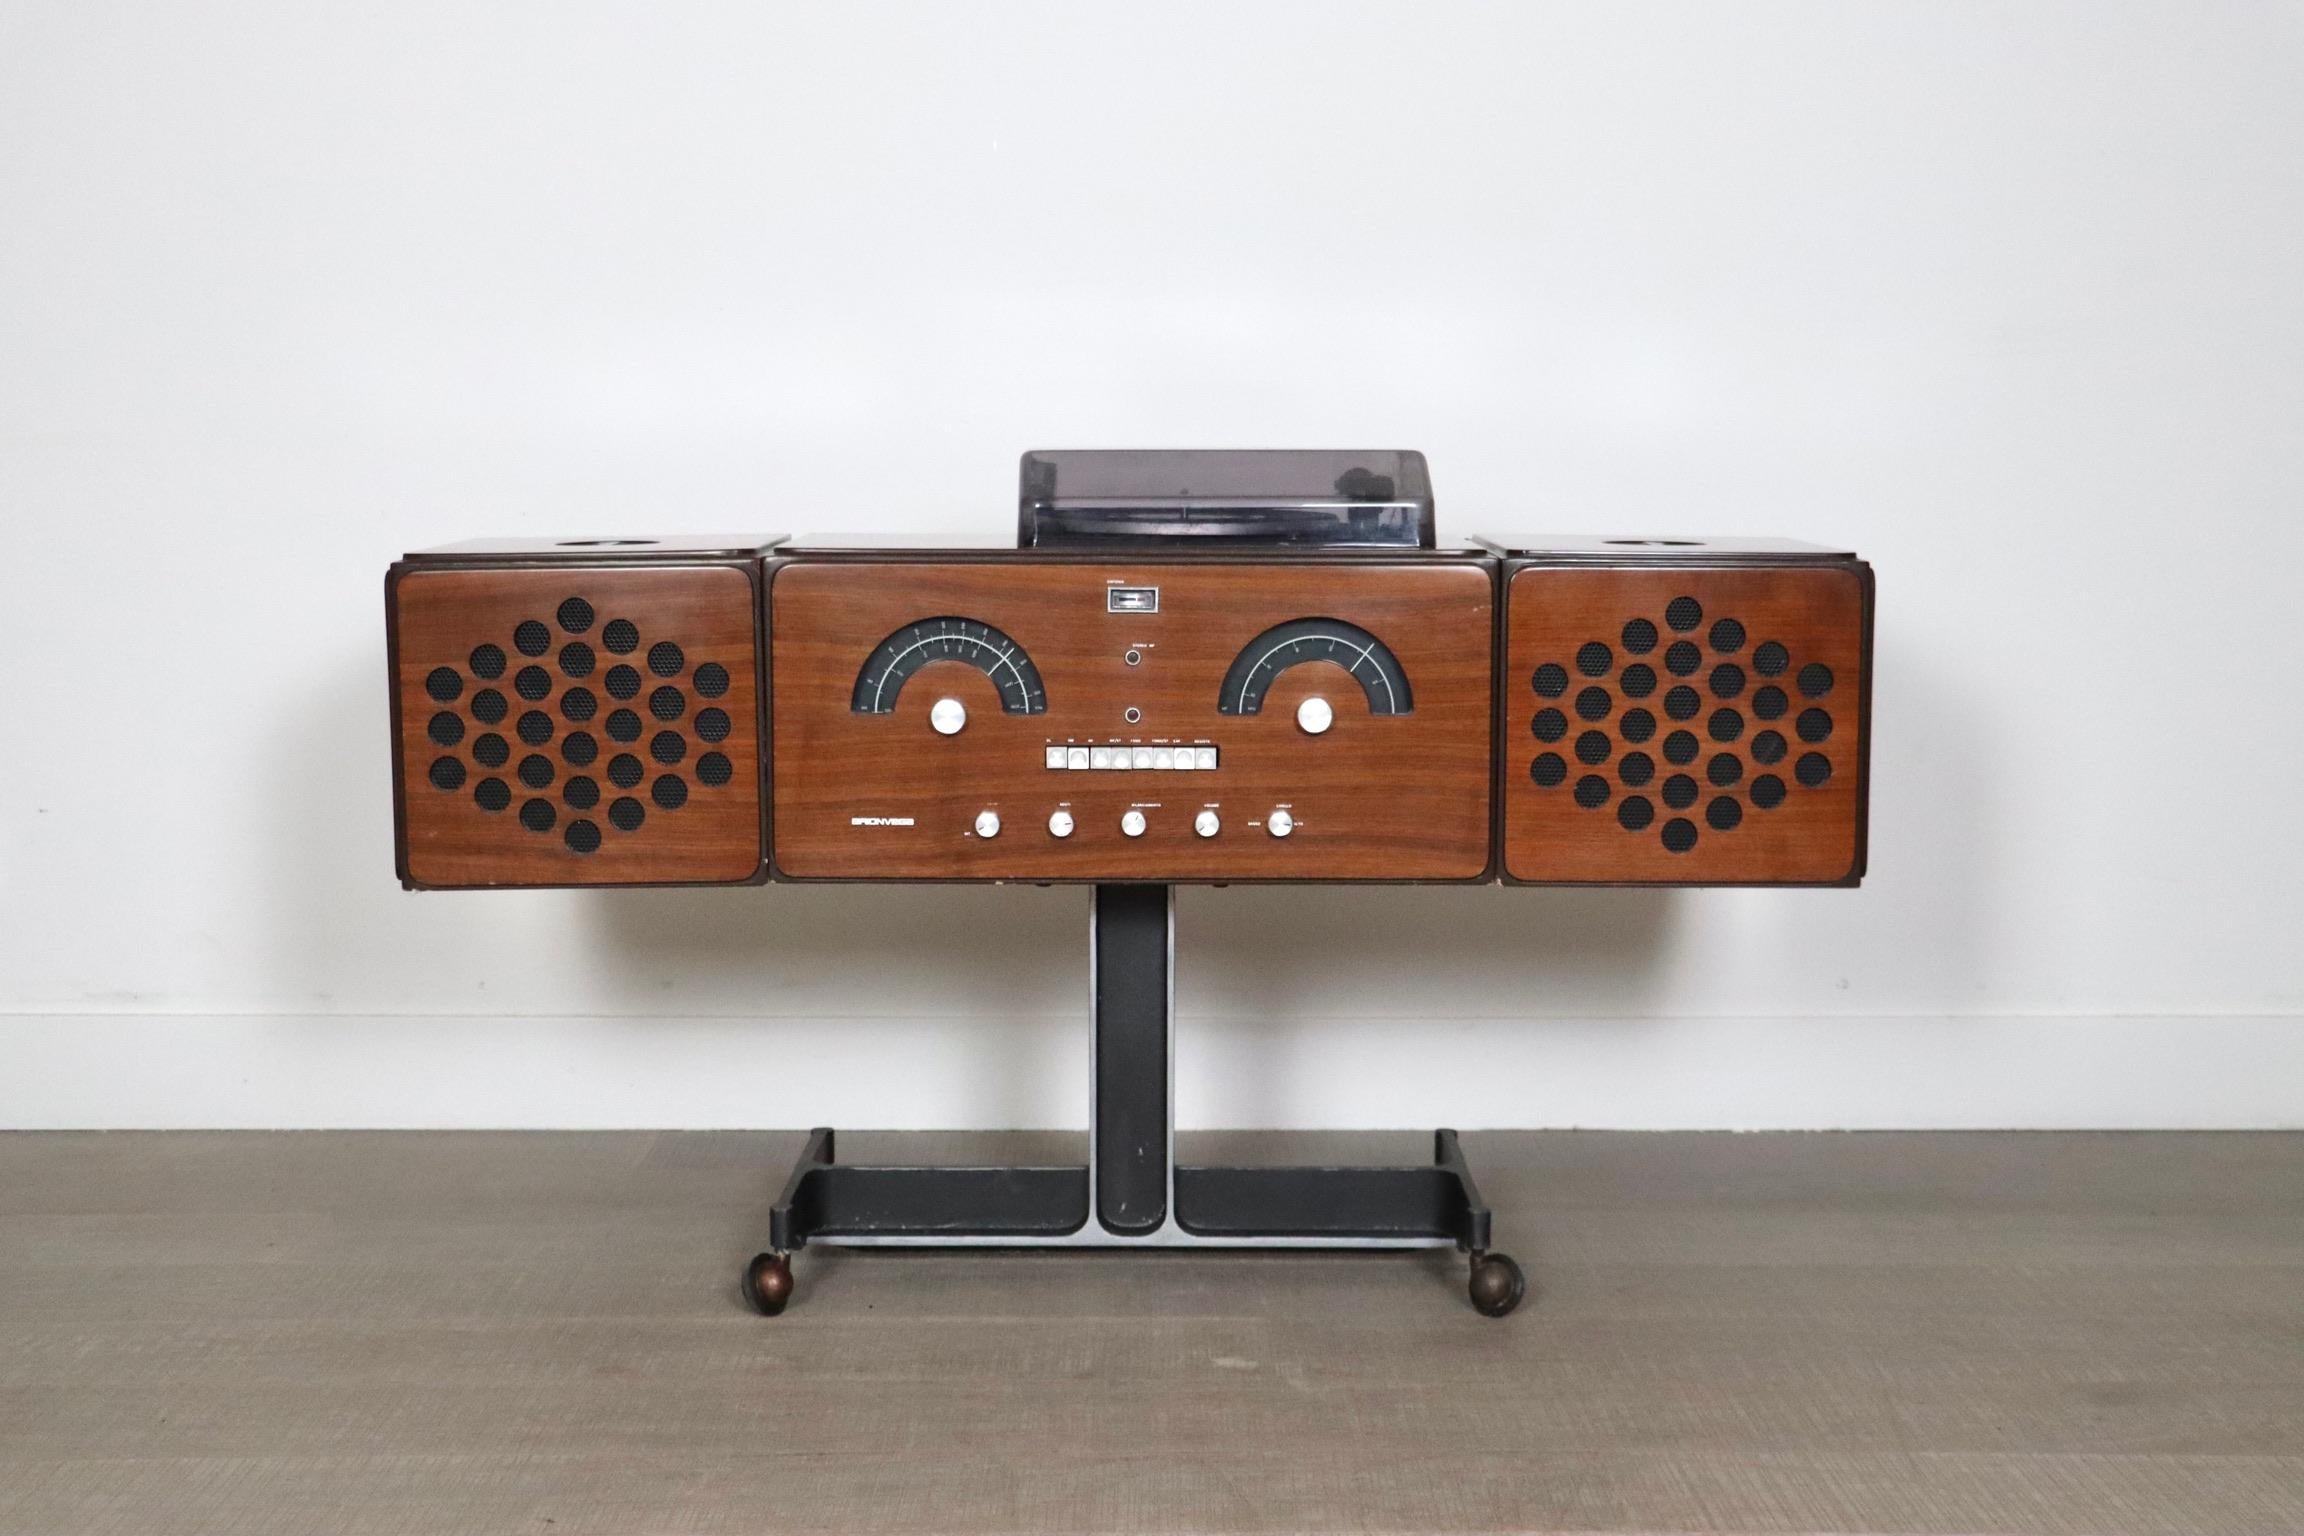 Nice Brionvega RR126 radio in teak by Achille and Pier Giacomo Castiglioni, Italy 1960s.
RR126 stereo system was designed in 1965 by brothers Achille and Pier Giacomo Castiglioni. This one is made of brown teak veneer and manufactured by Brionvega,